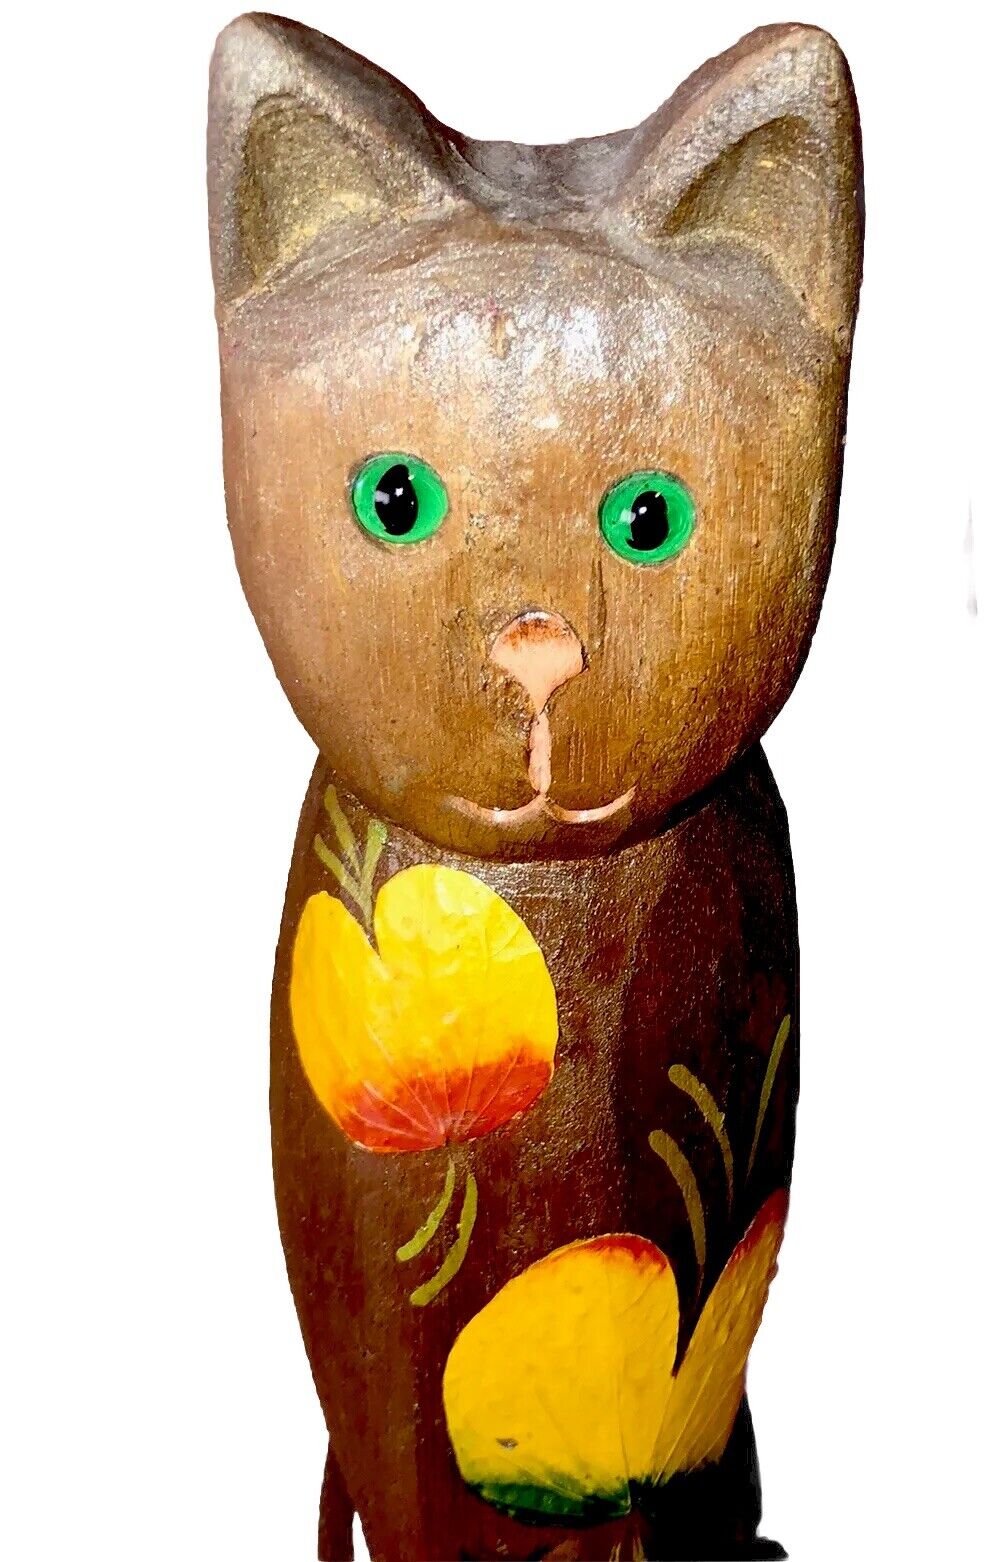 Vintage hand-painted 14 inch carved wood Philippines cat￼ Figurine￼